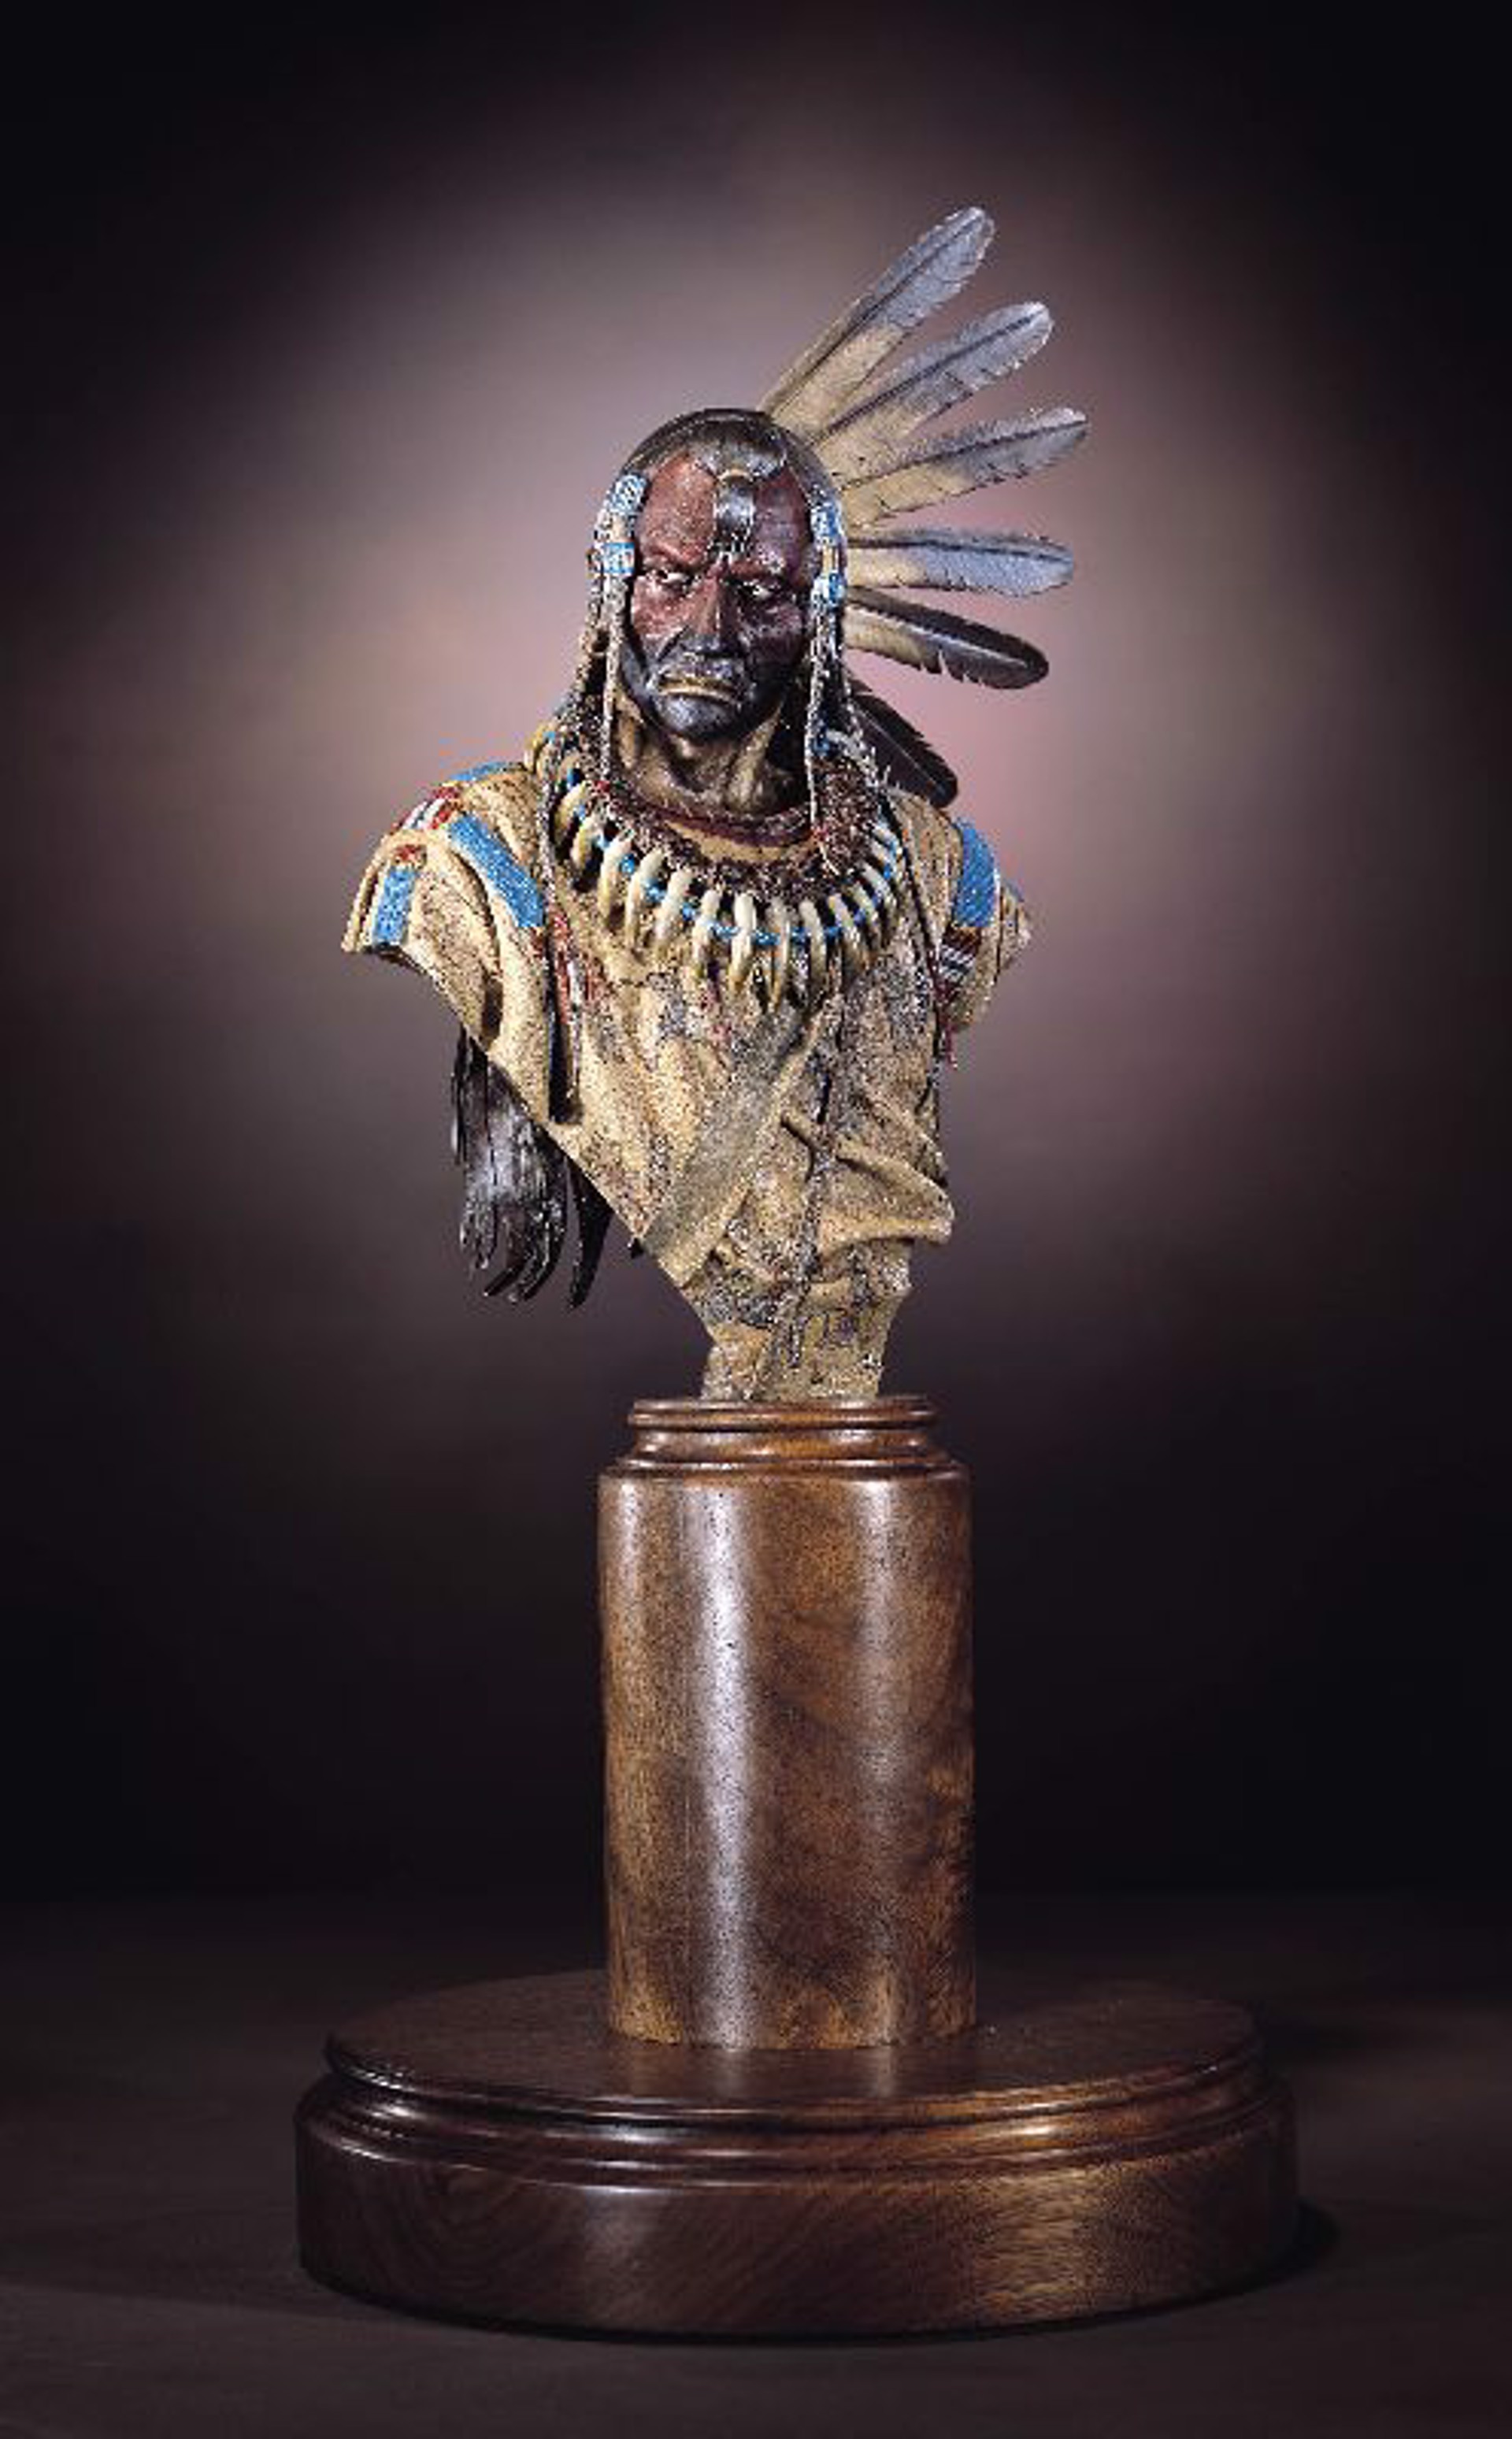 Enemies Past (bust) by Dave McGary (sculptor) (1958-2013)